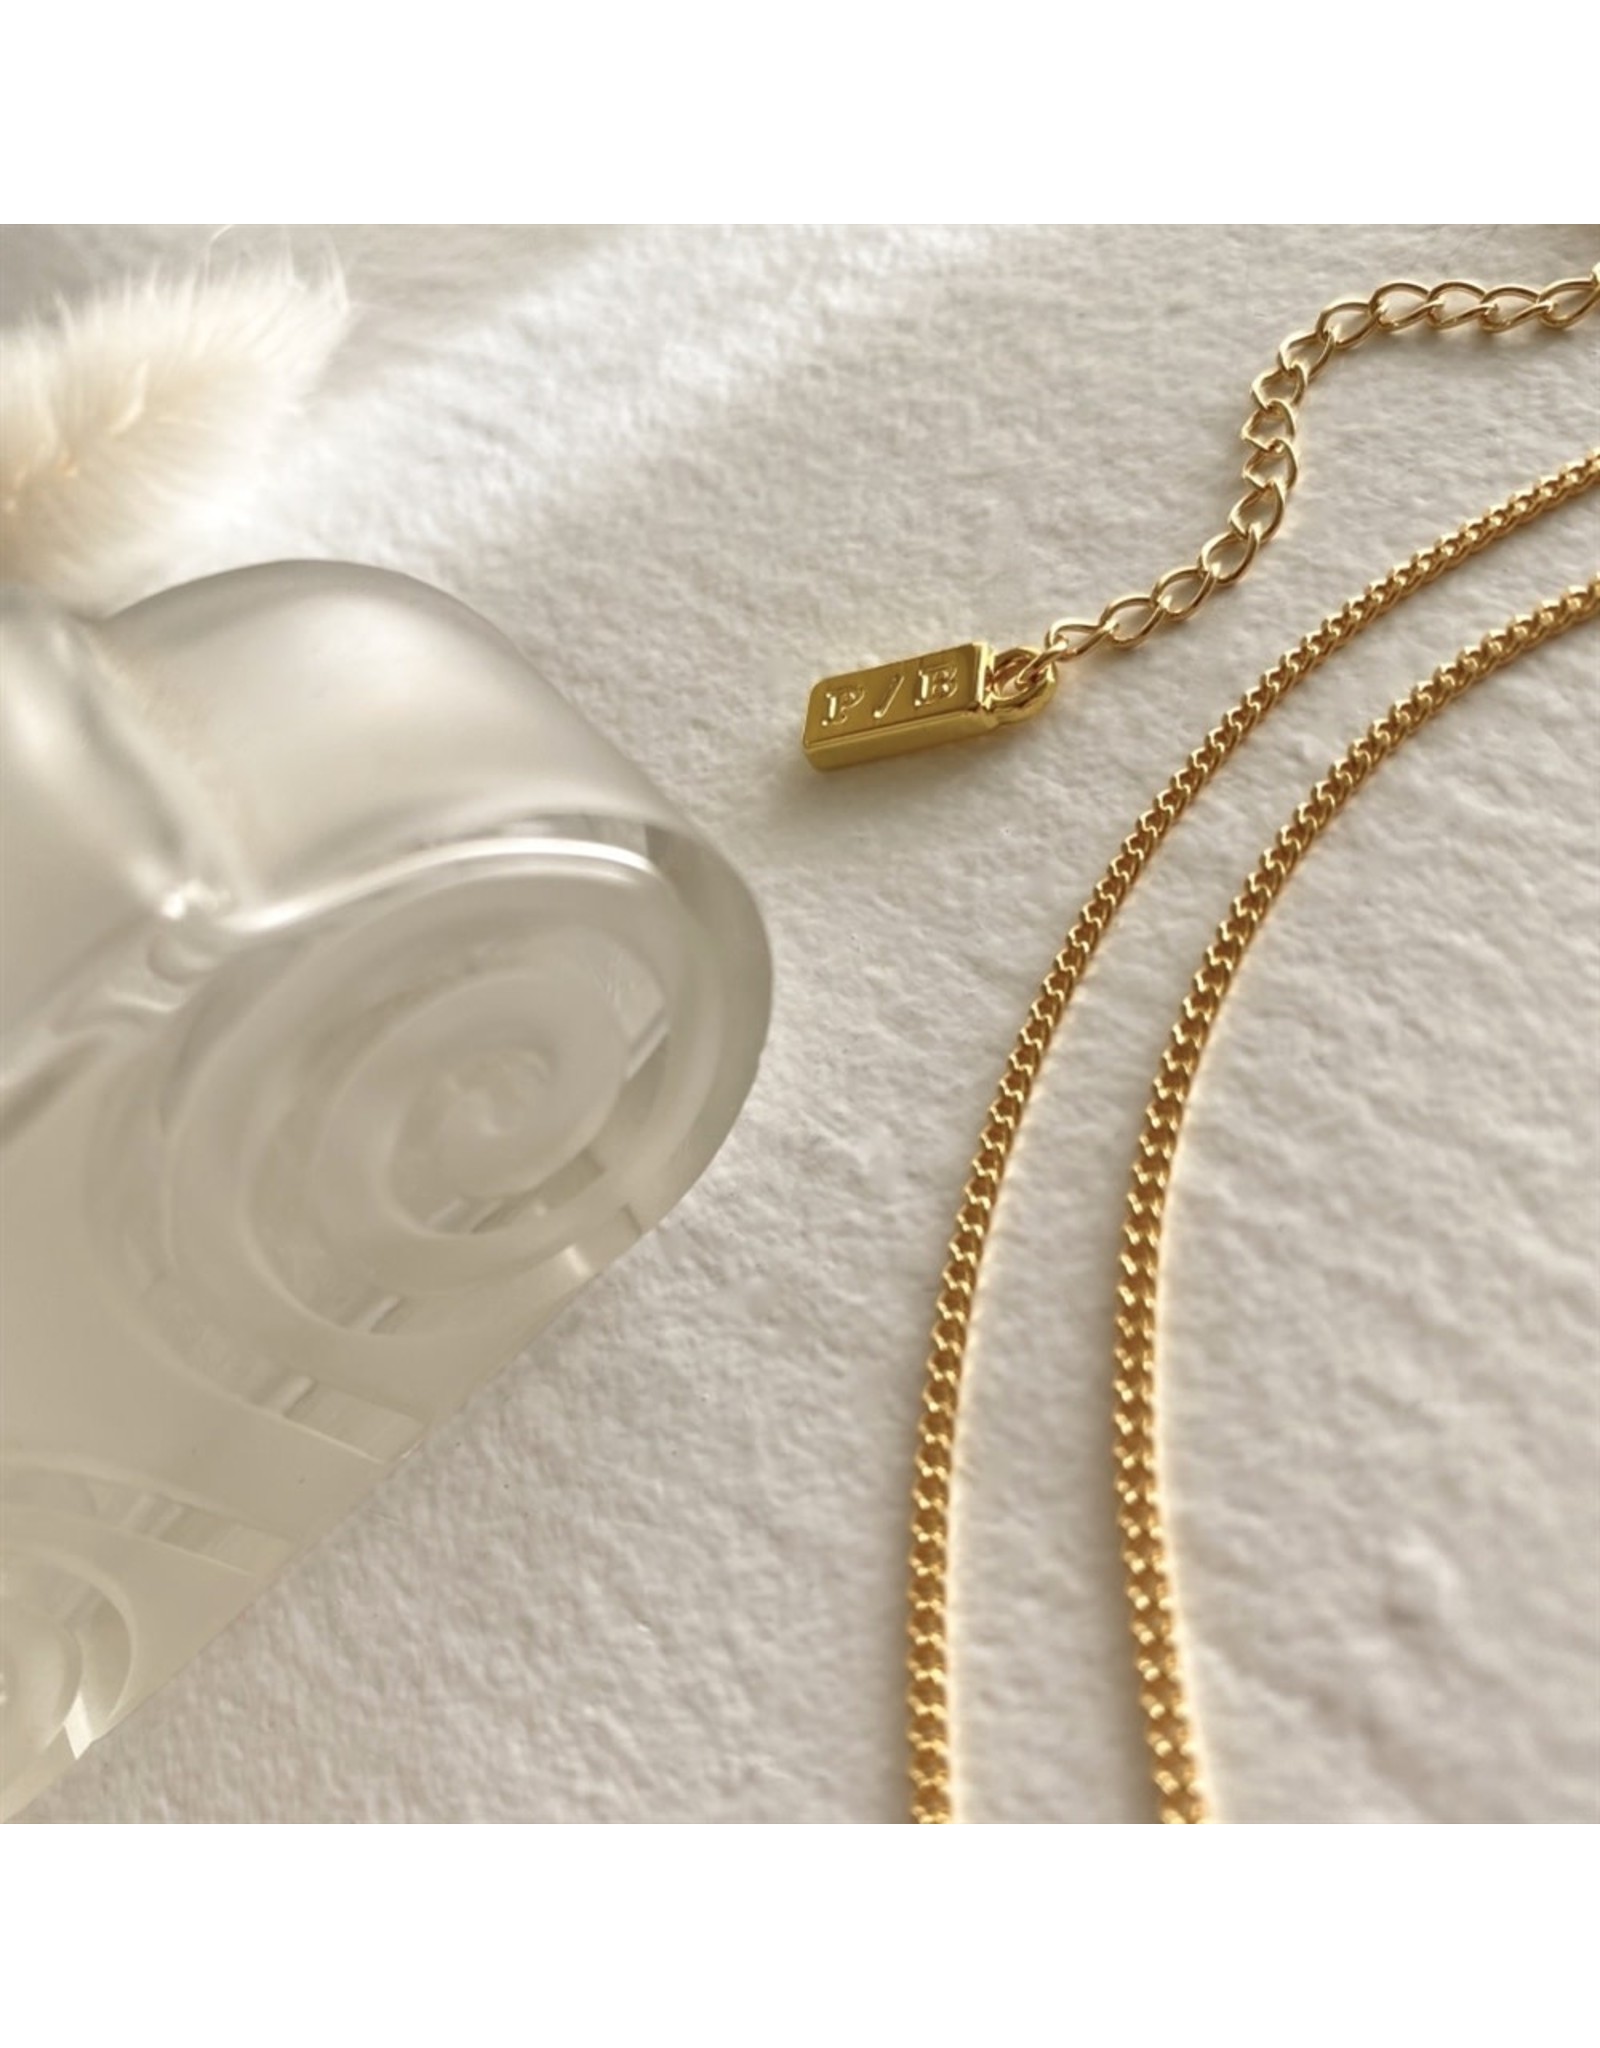 Pika & Bear Pika & Bear - Le Clos Normand Birth/Wildflower Pendant Necklace Collection - June/Rose